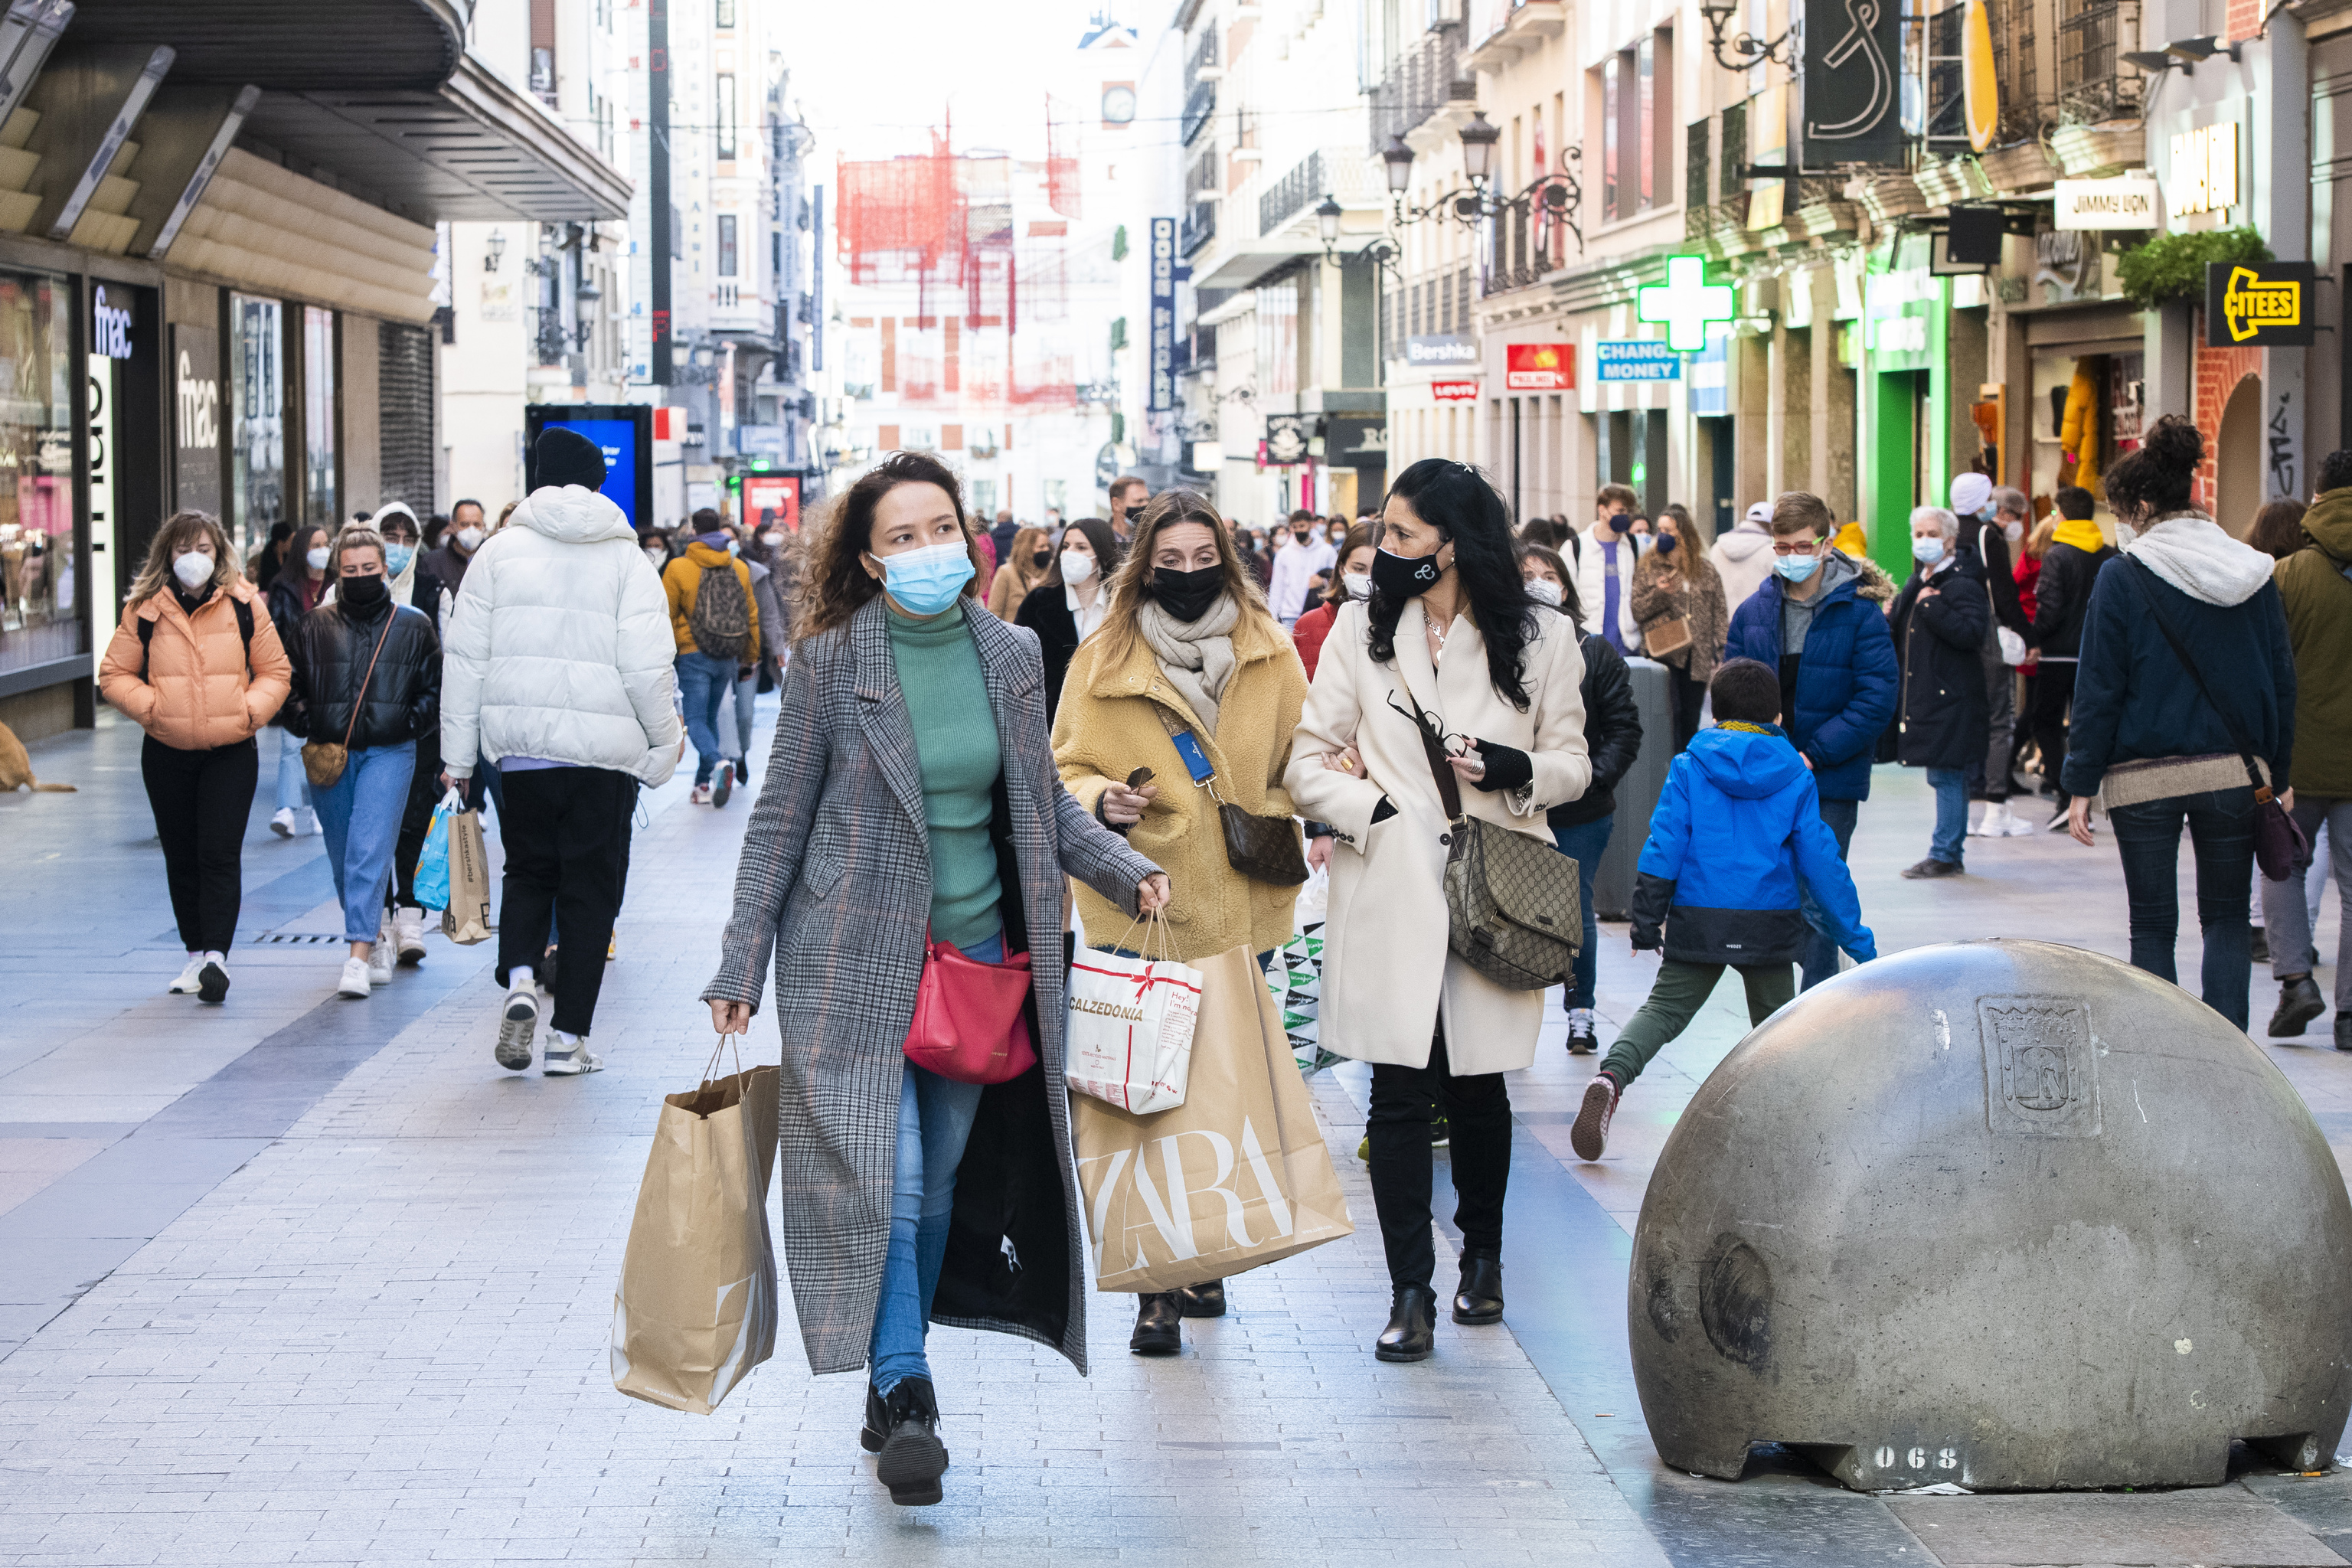 People shopping on Preciados Street in Madrid